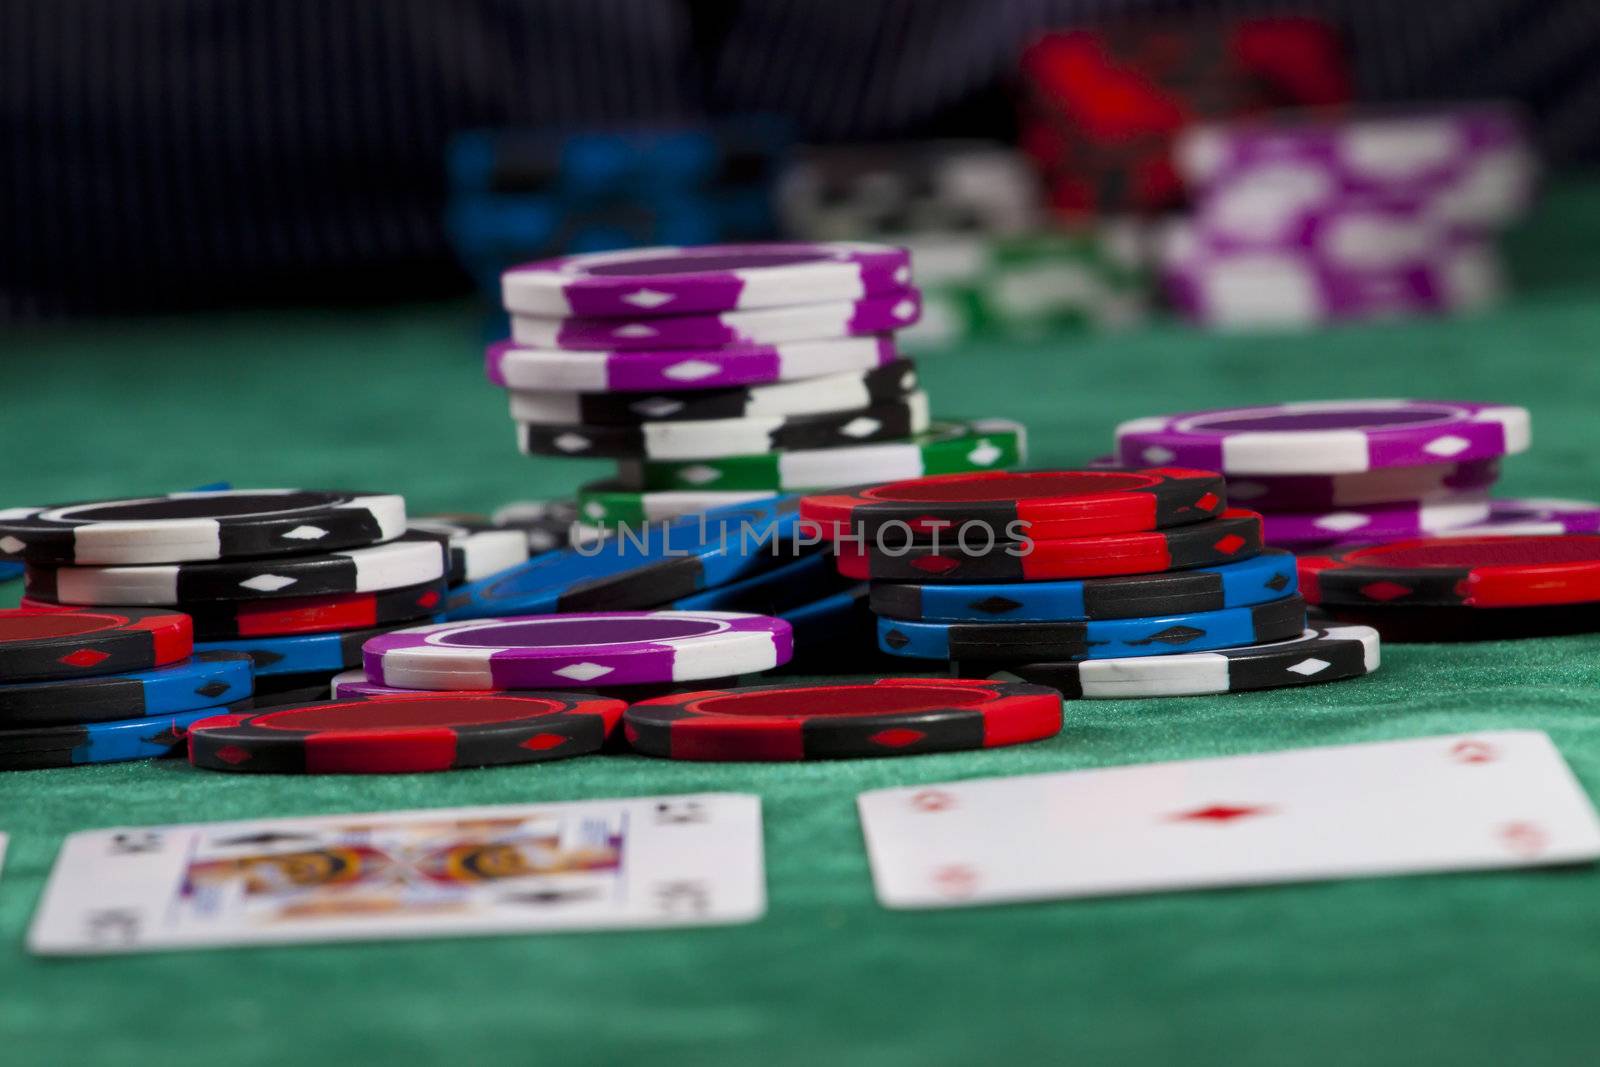 Poker chips by Lamarinx